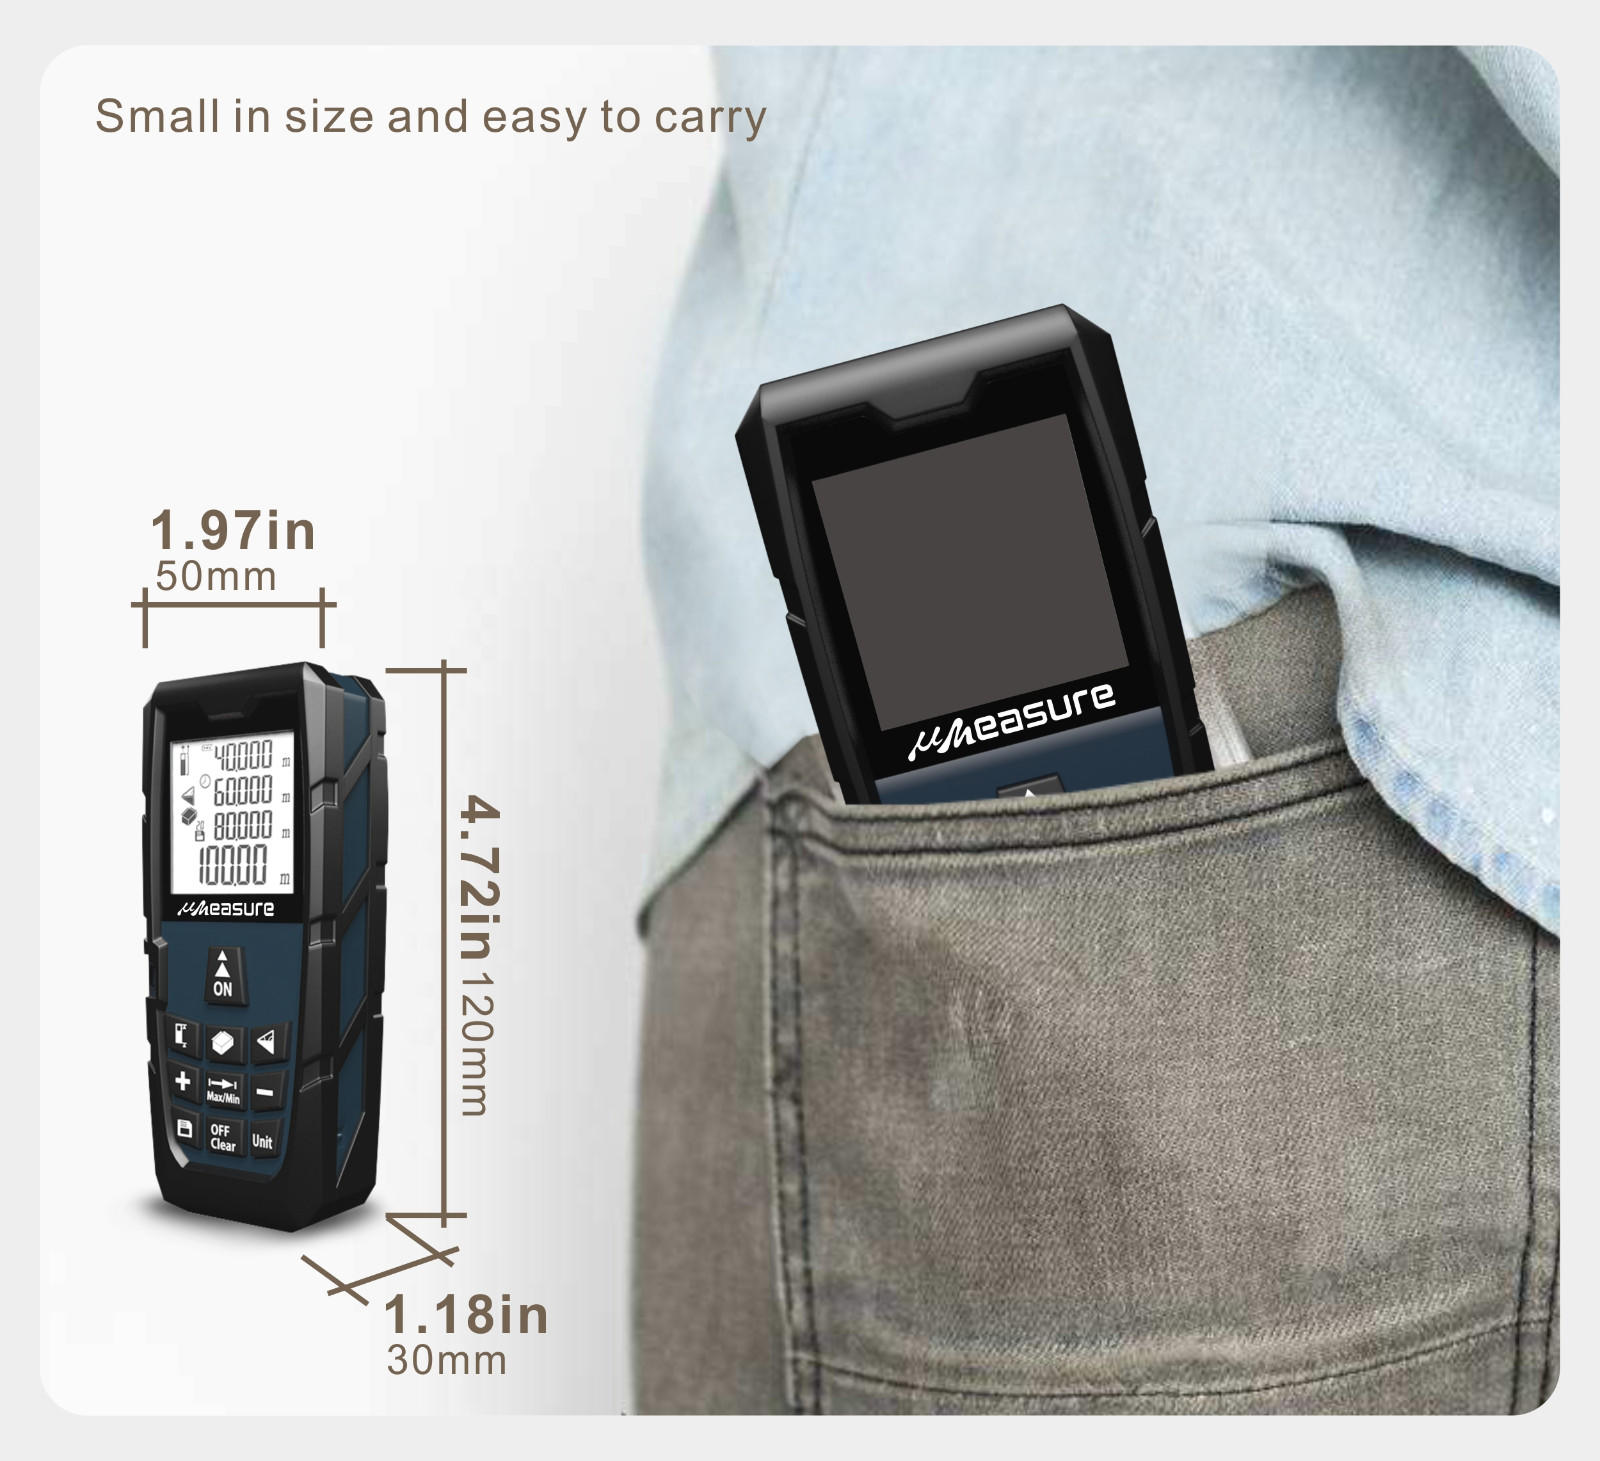 UMeasure carrying laser measuring devices display for worker